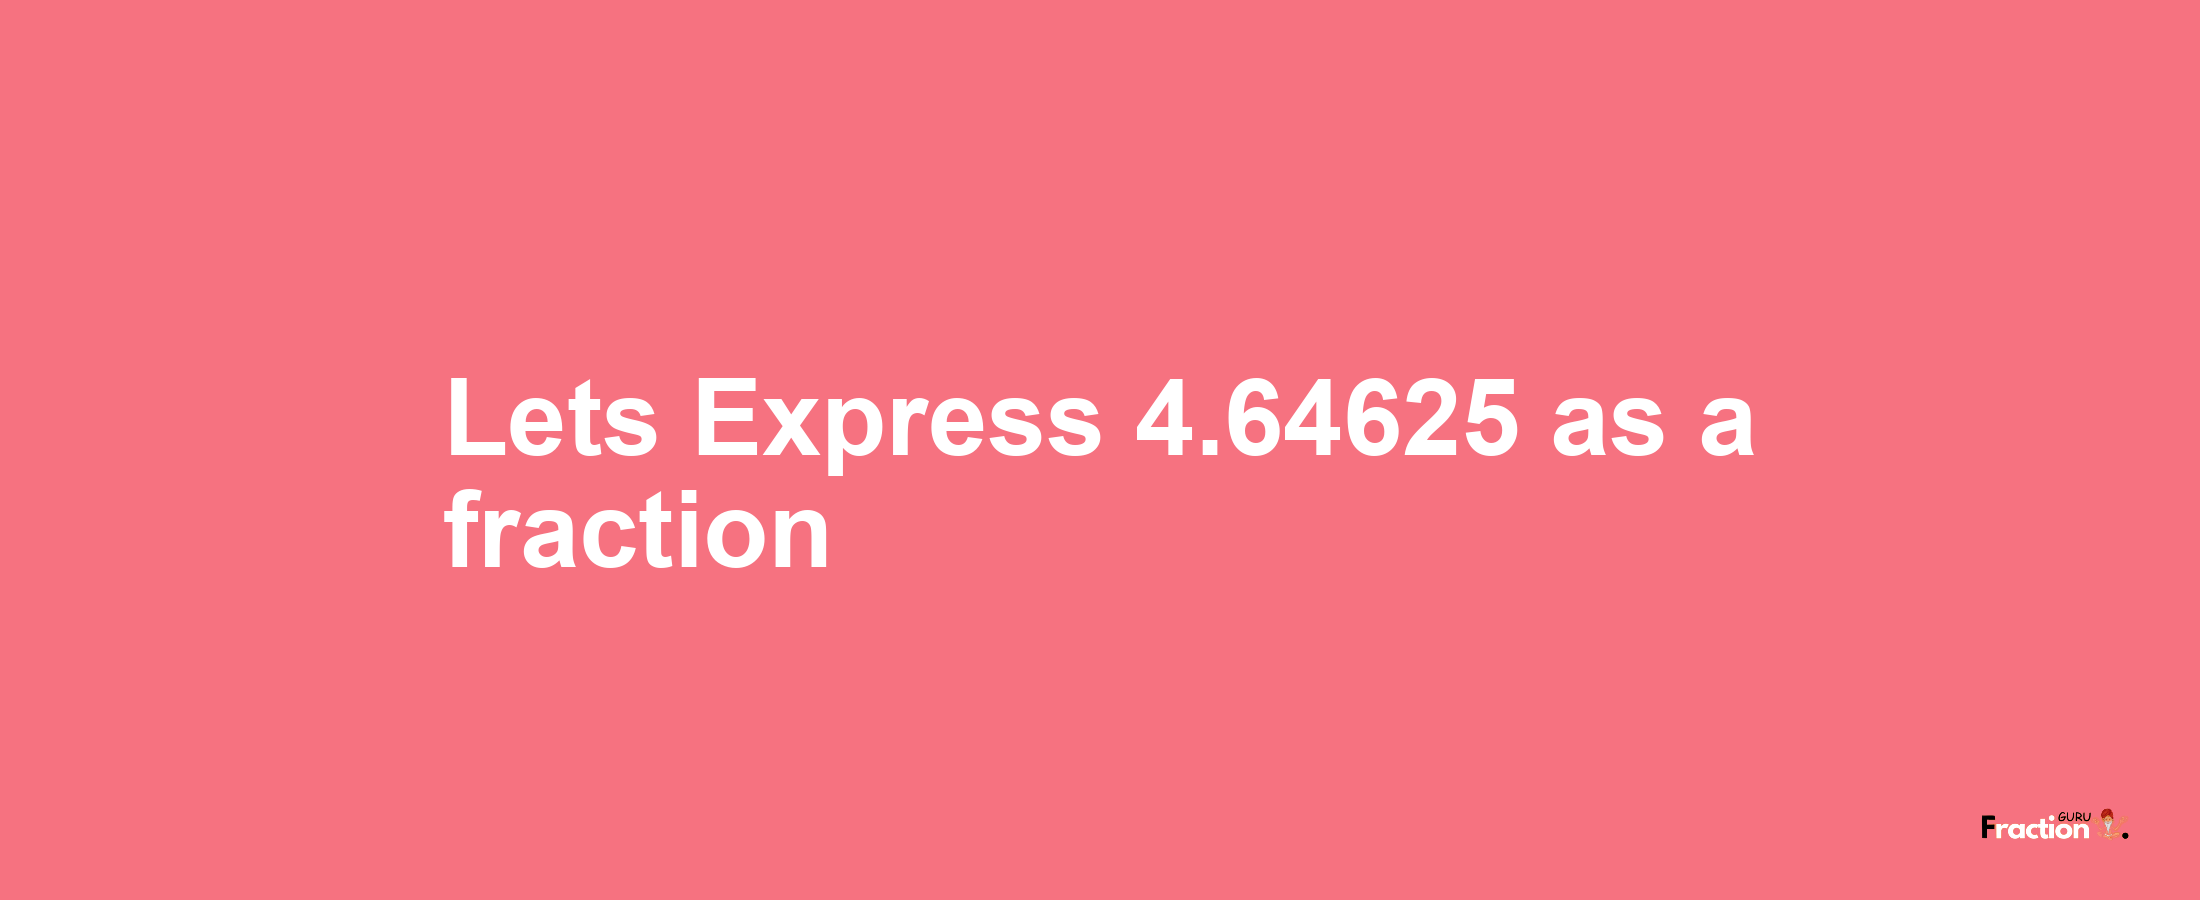 Lets Express 4.64625 as afraction